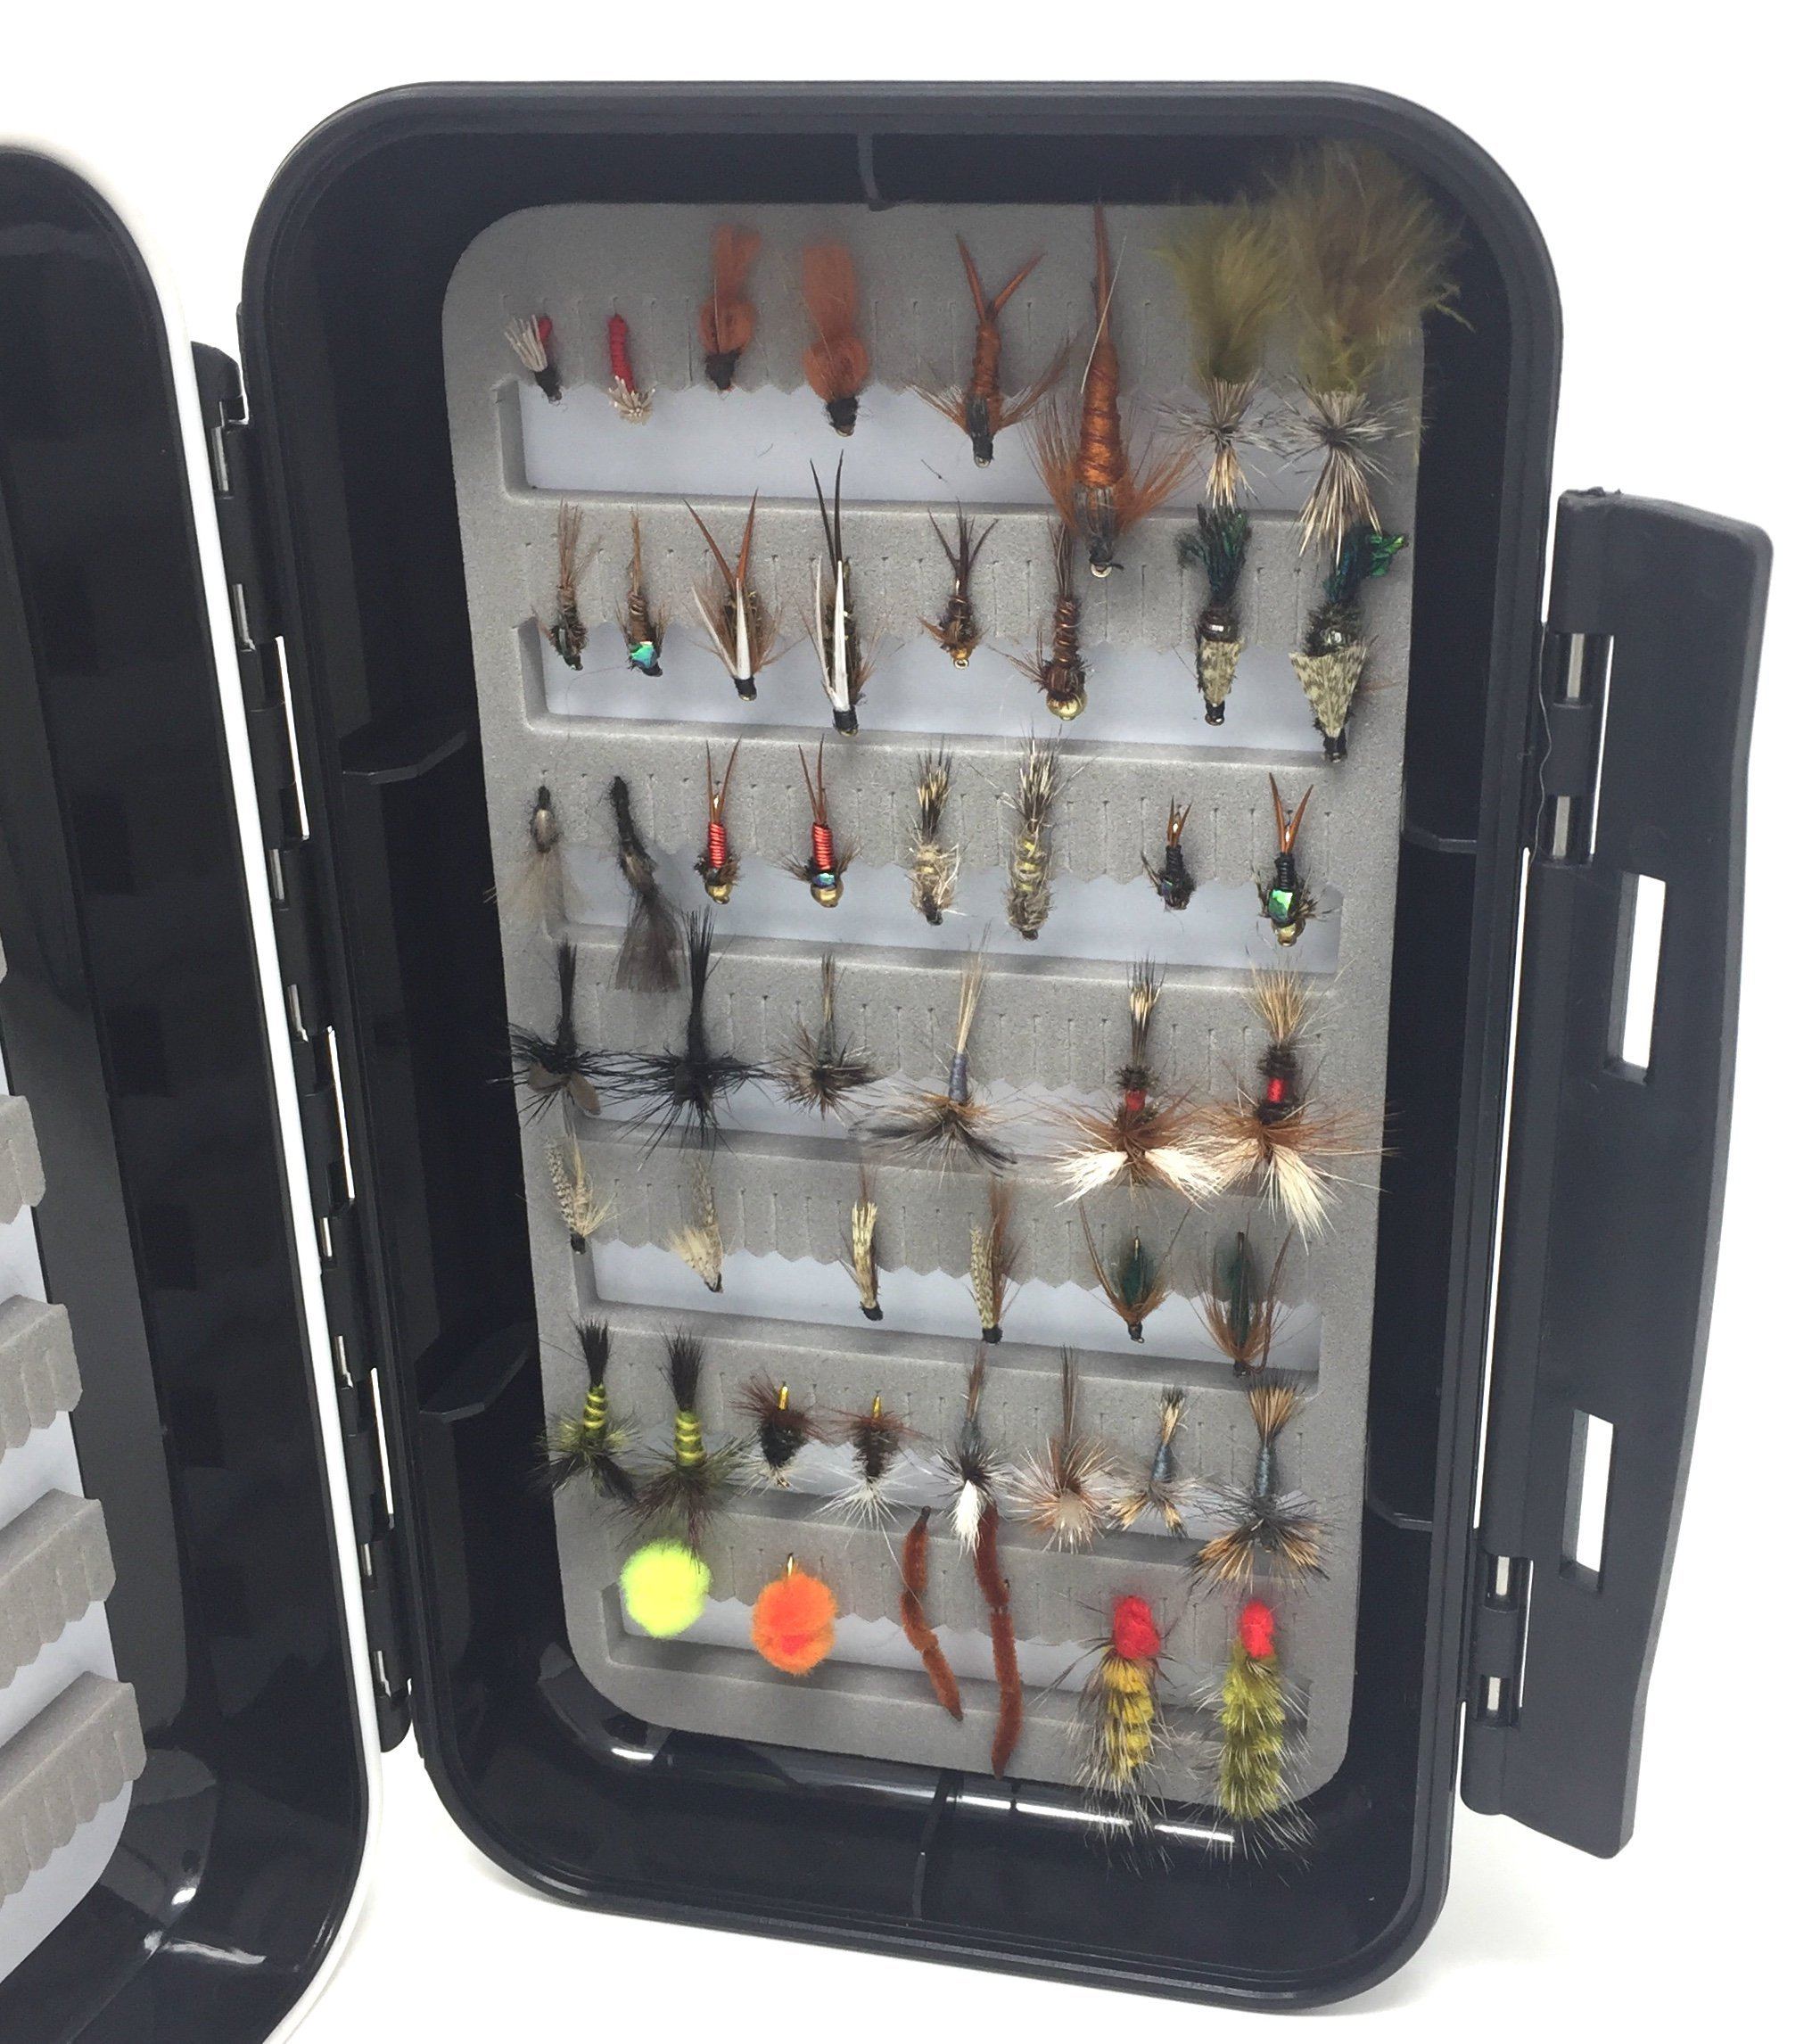 Buy Feeder Creek Fly Fishing Trout Flies - The HUMPY Assortment